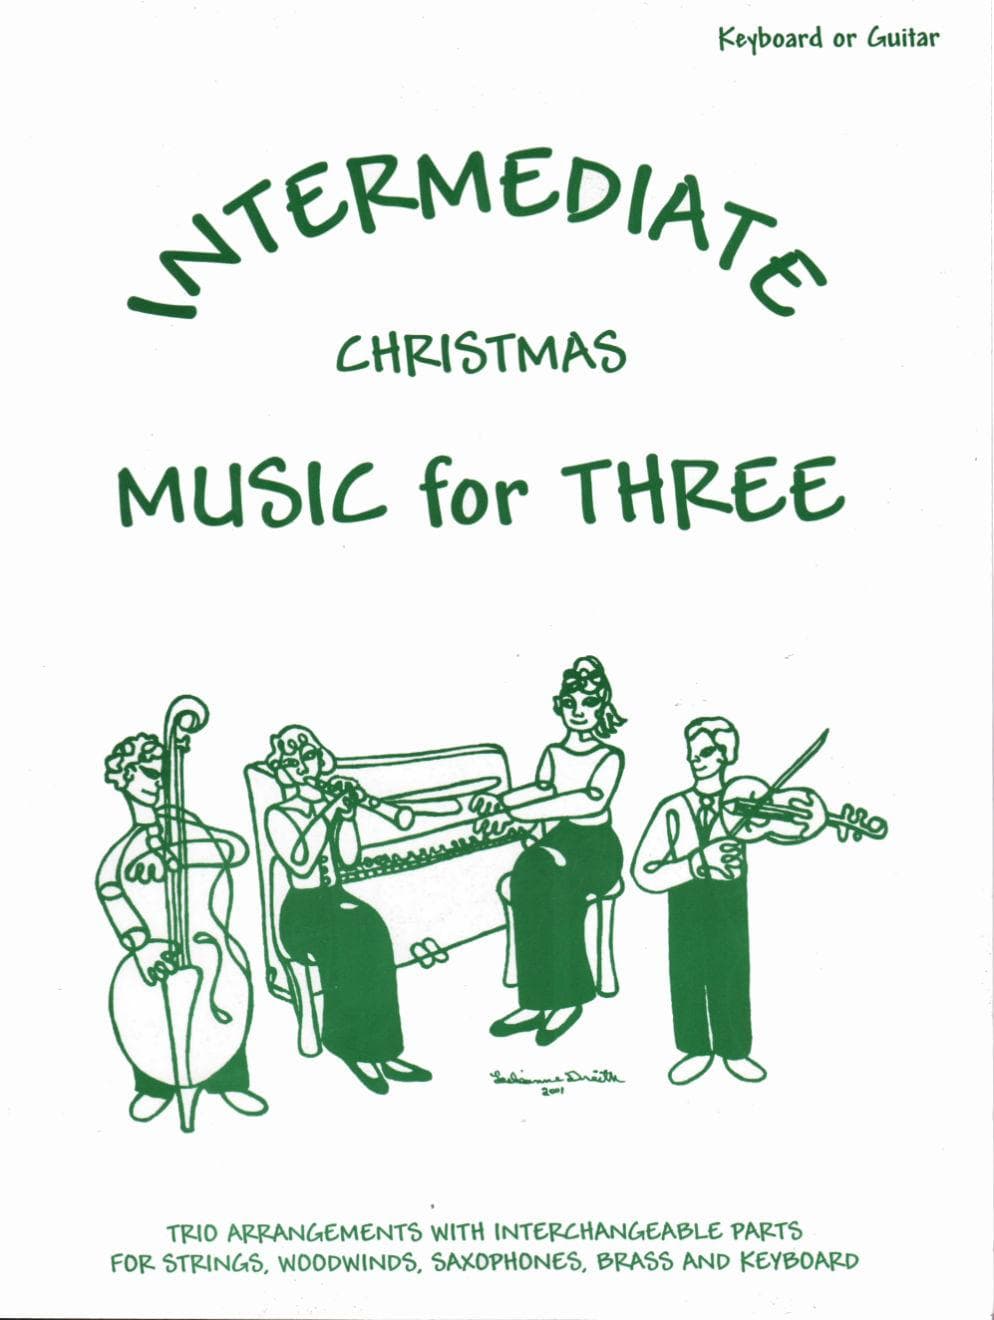 Music for Three, Christmas for Keyboard or Guitar Published by Last Resort Music